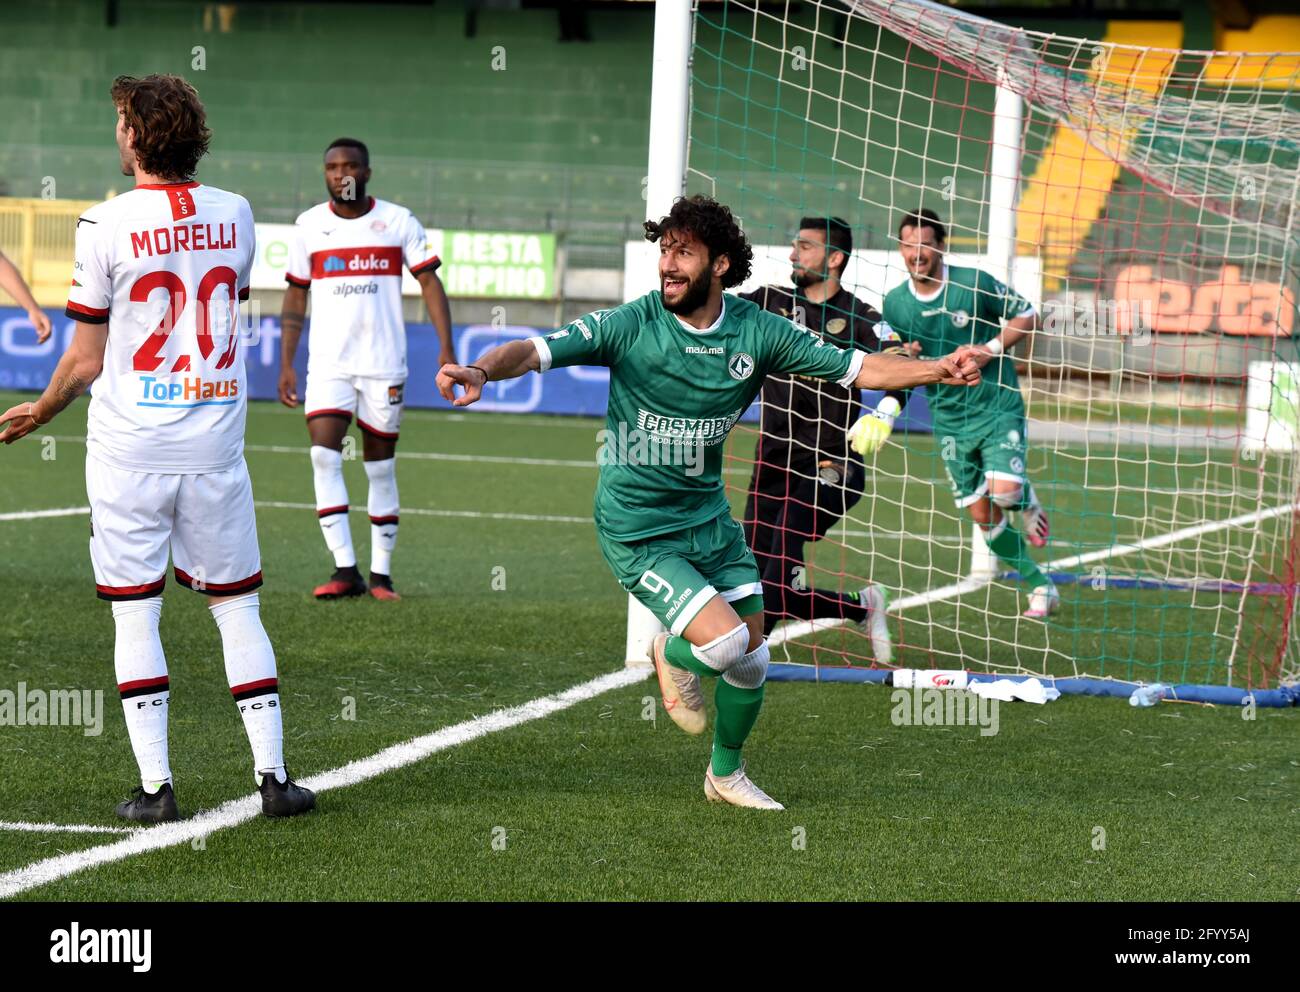 Avellino, Italy. 30th May, 2021. Emanuele Santaniello of US Avellino during the Lega Pro Playoff match between US Avelino and FC Sudtirol at Partenio Adriano Lombardi stadium. Credit: Alessandro Pirone / Medialys Images Stock Photo